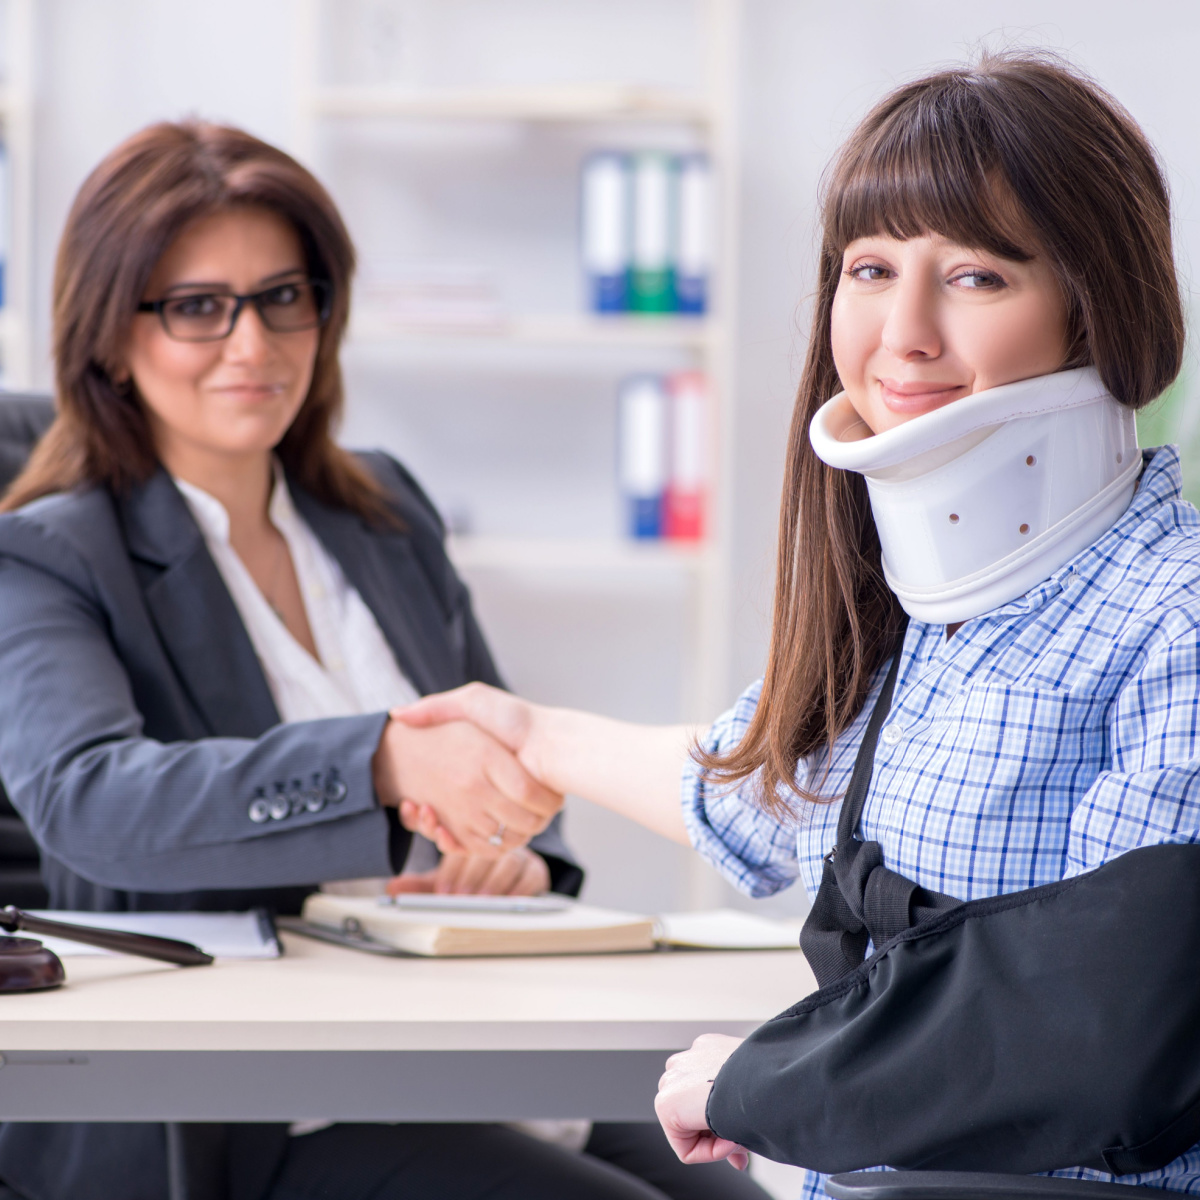 Houston personal injury lawyer helps her client document her injuries.